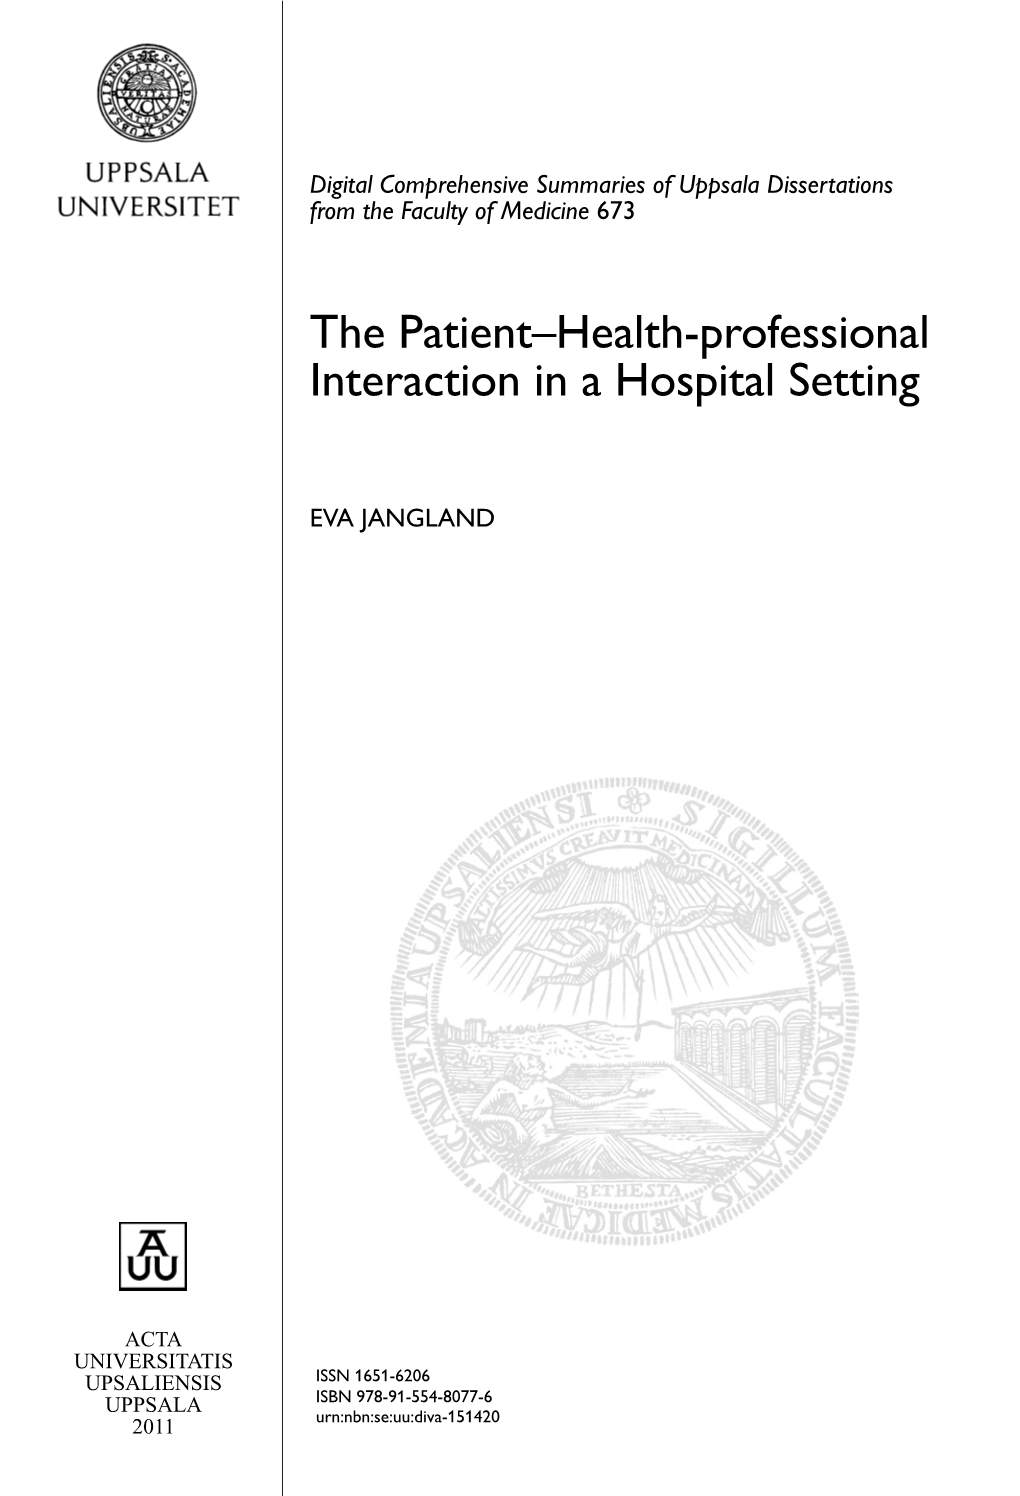 The Patient–Health-Professional Interaction in a Hospital Setting